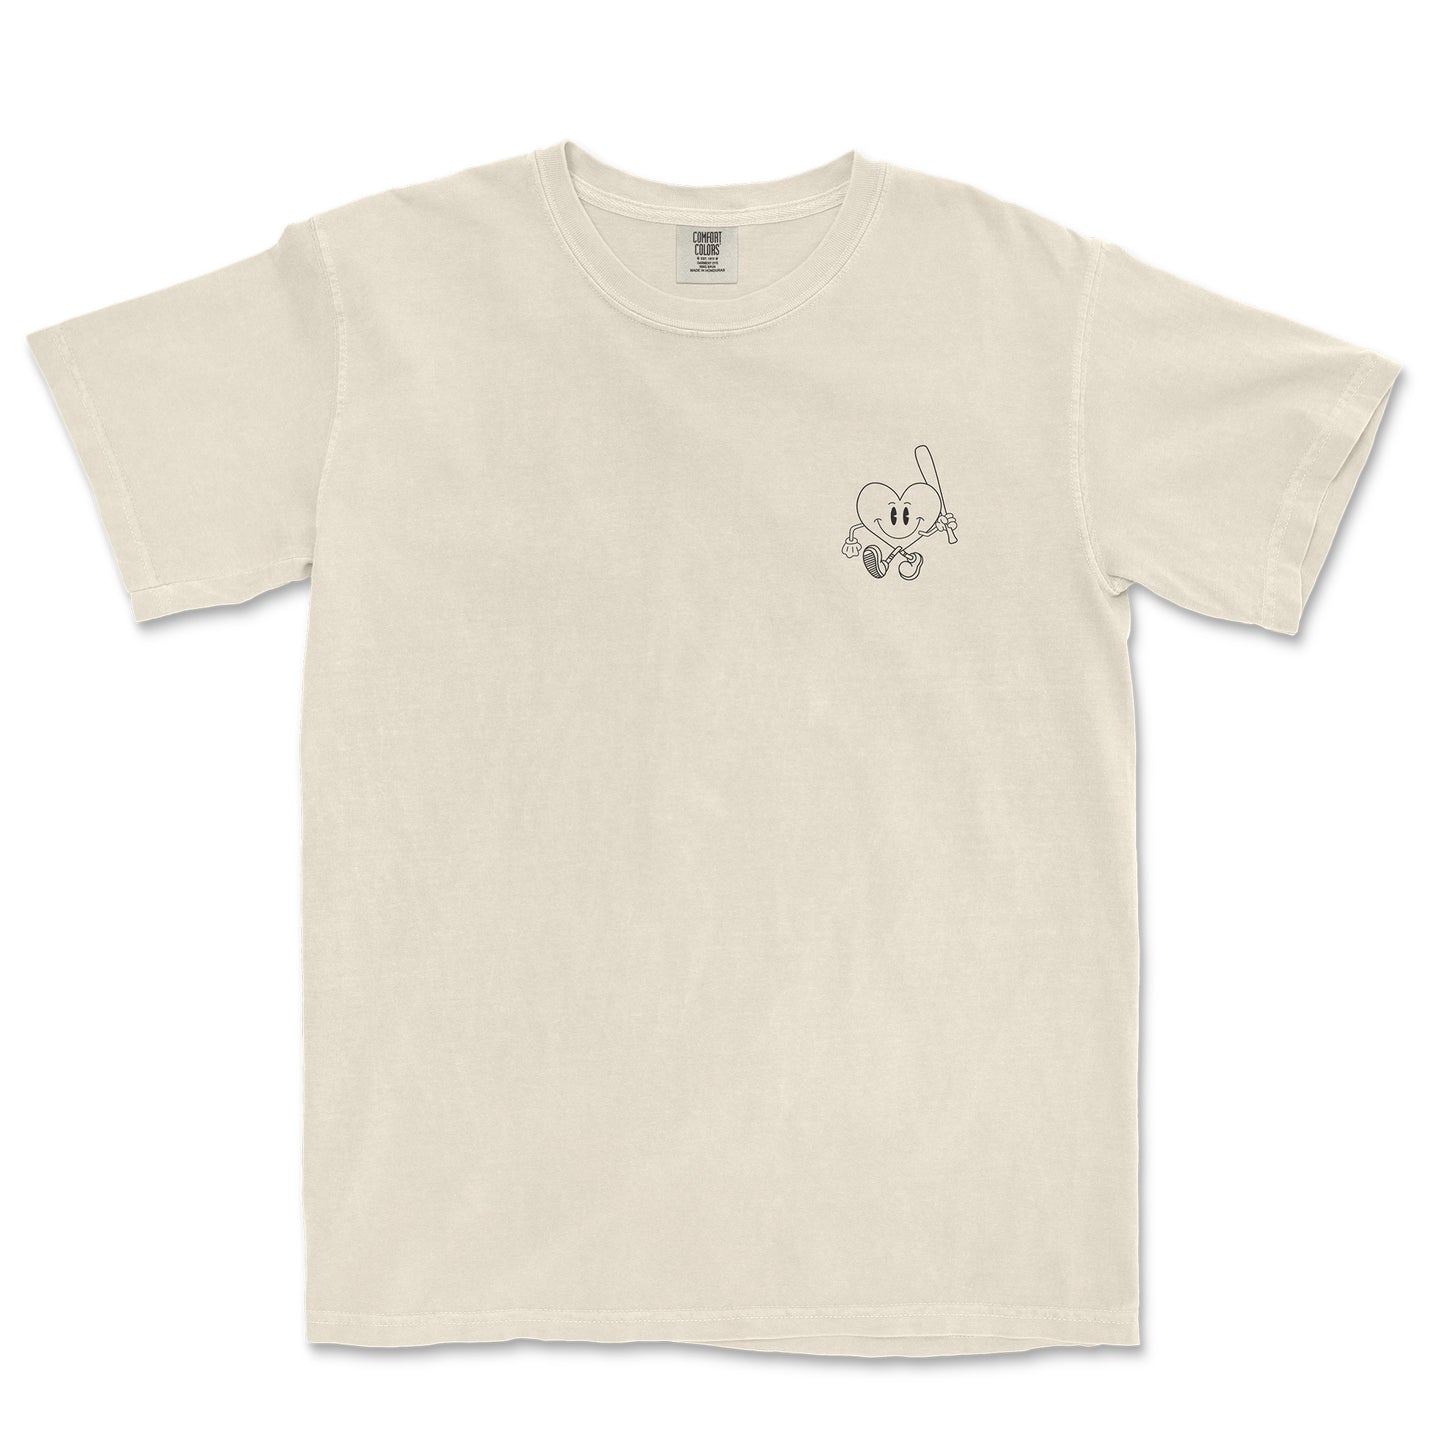 I'M NOT DOING THAT (ALTERNATE) | COMFORT COLORS® VINTAGE TEE